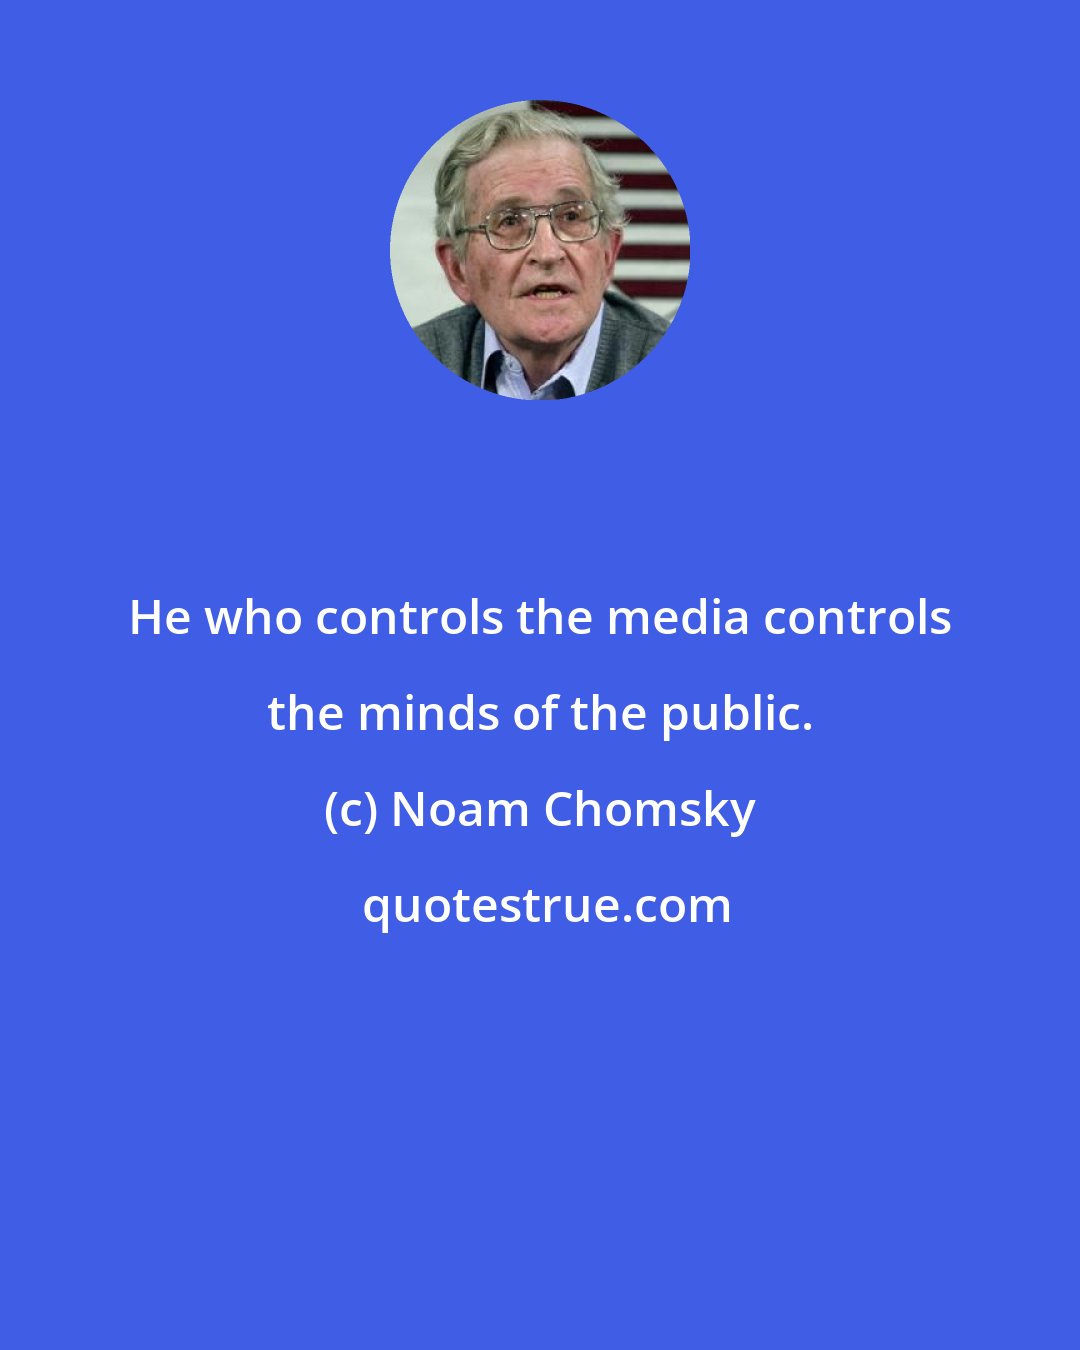 Noam Chomsky: He who controls the media controls the minds of the public.